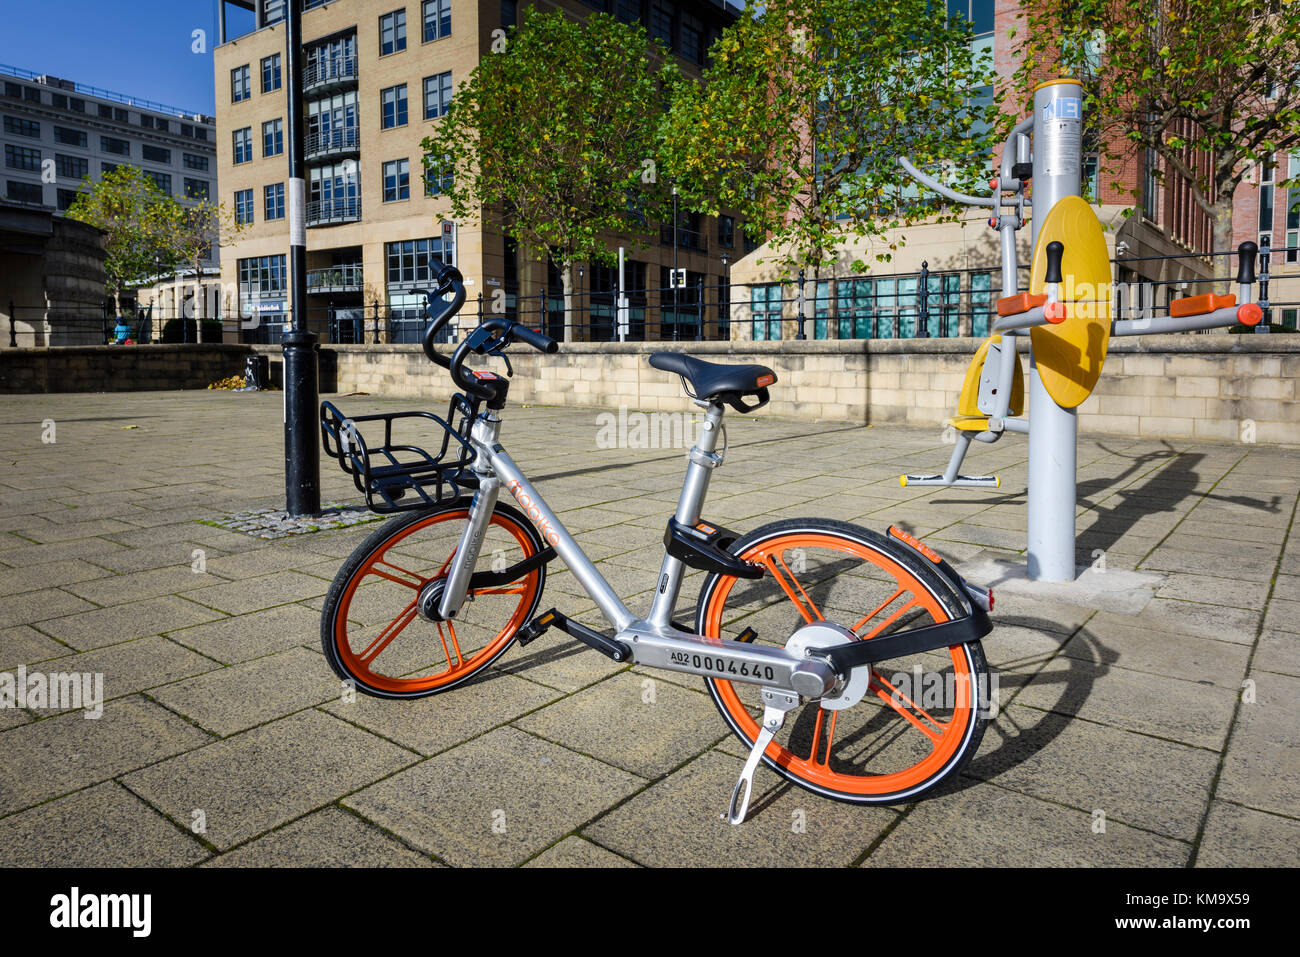 Mobike High-tech, lightweight bikes fitted with GPS trackers available for hire via mobile phone app in Newcastle upon Tyne Stock Photo